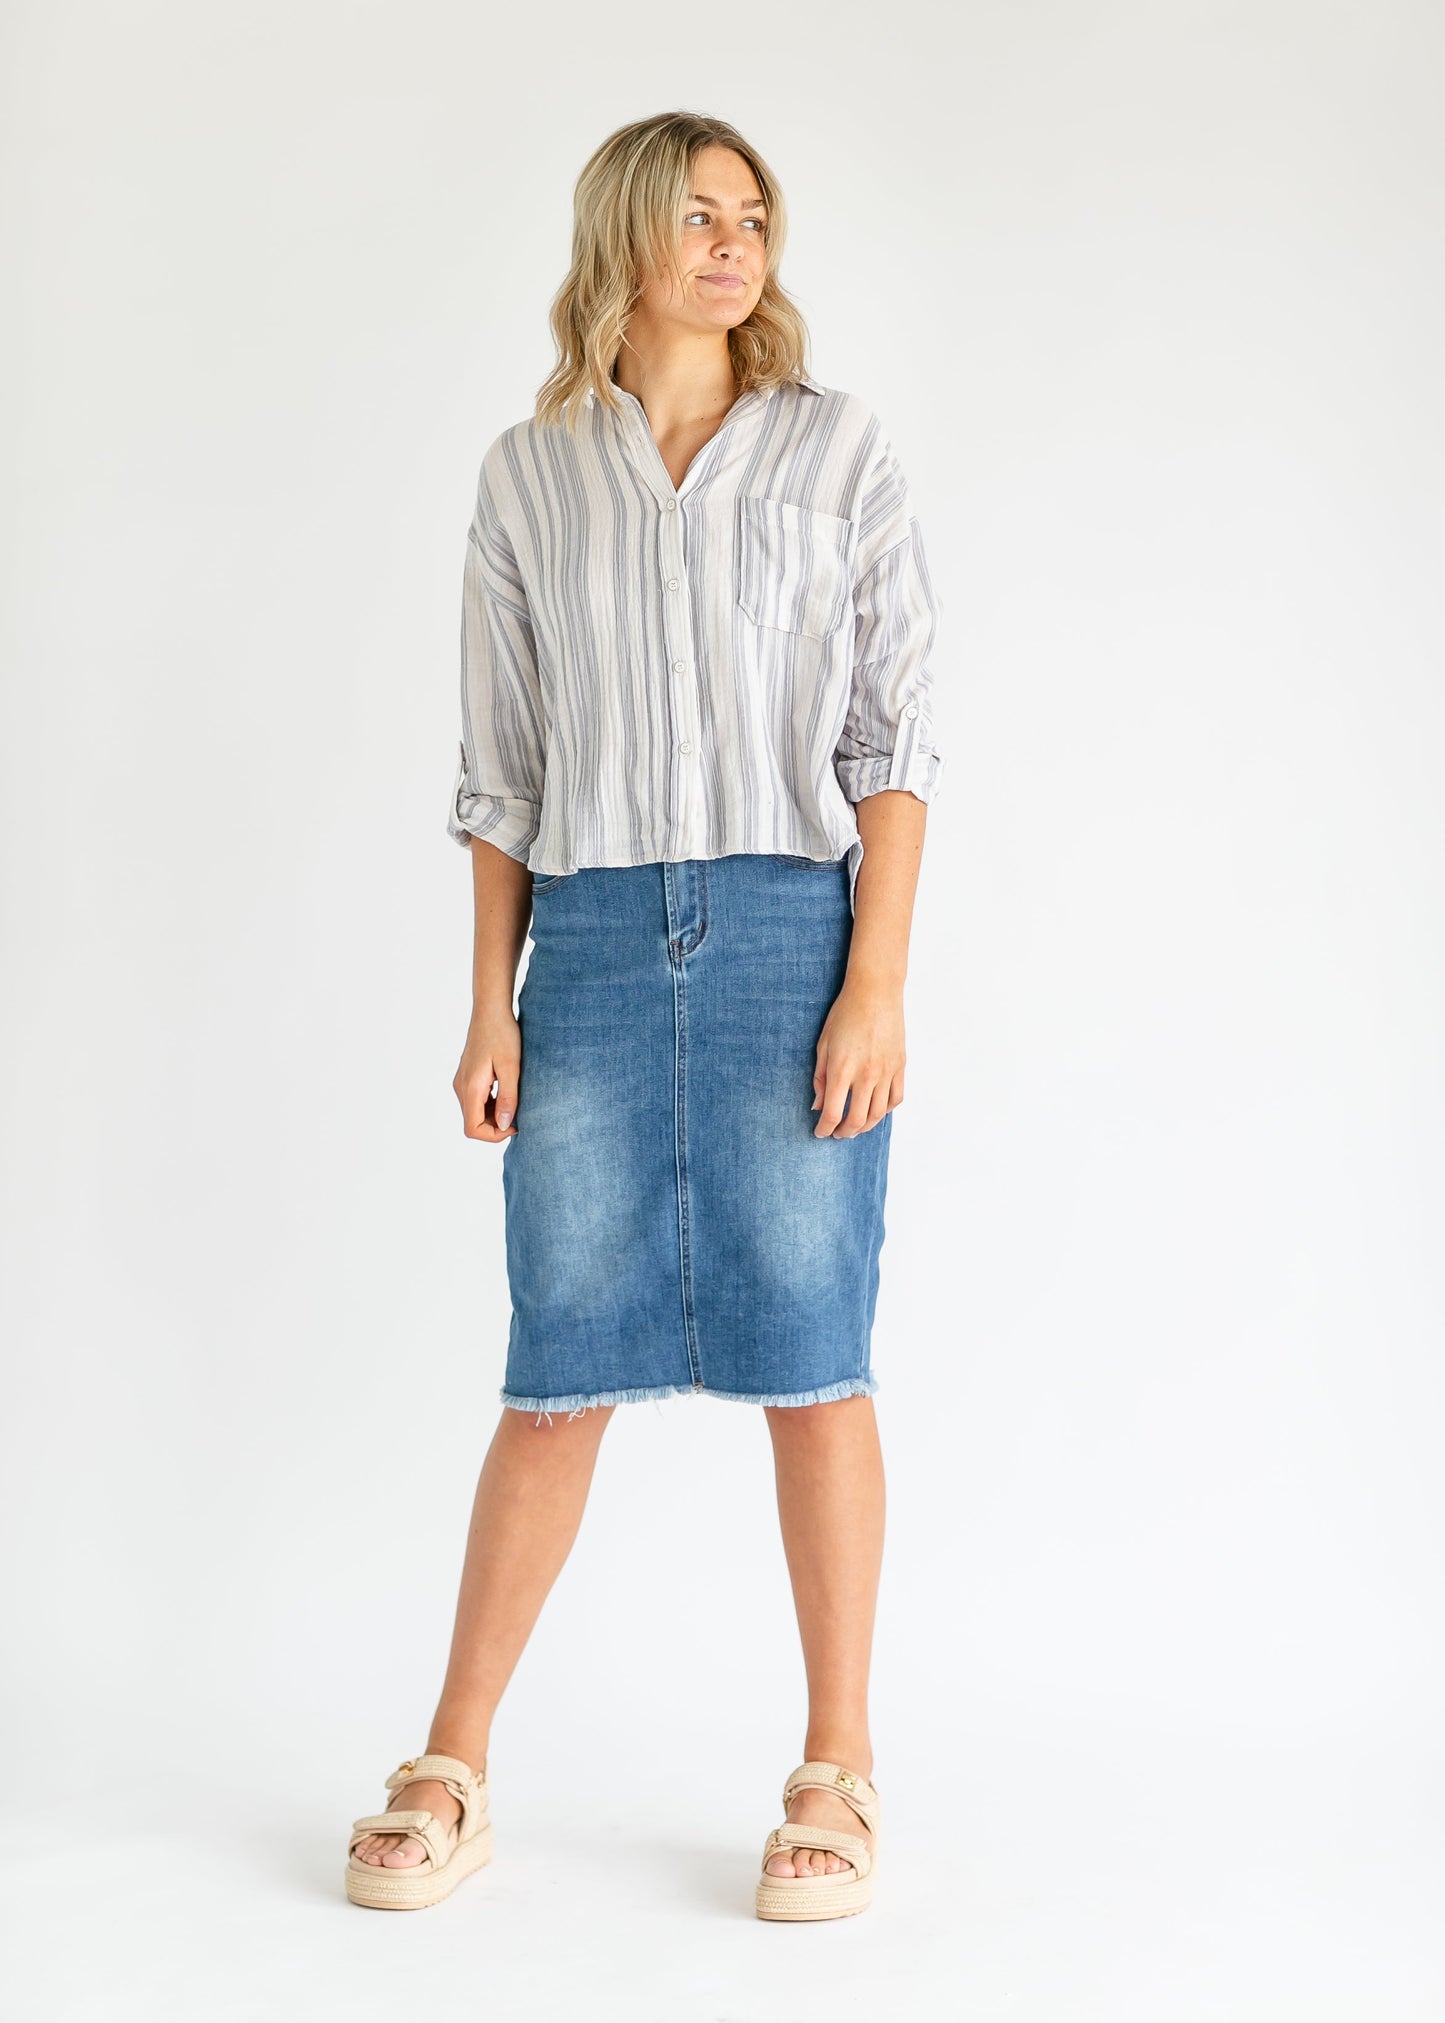 Skye Striped Button-up Top FF Tops